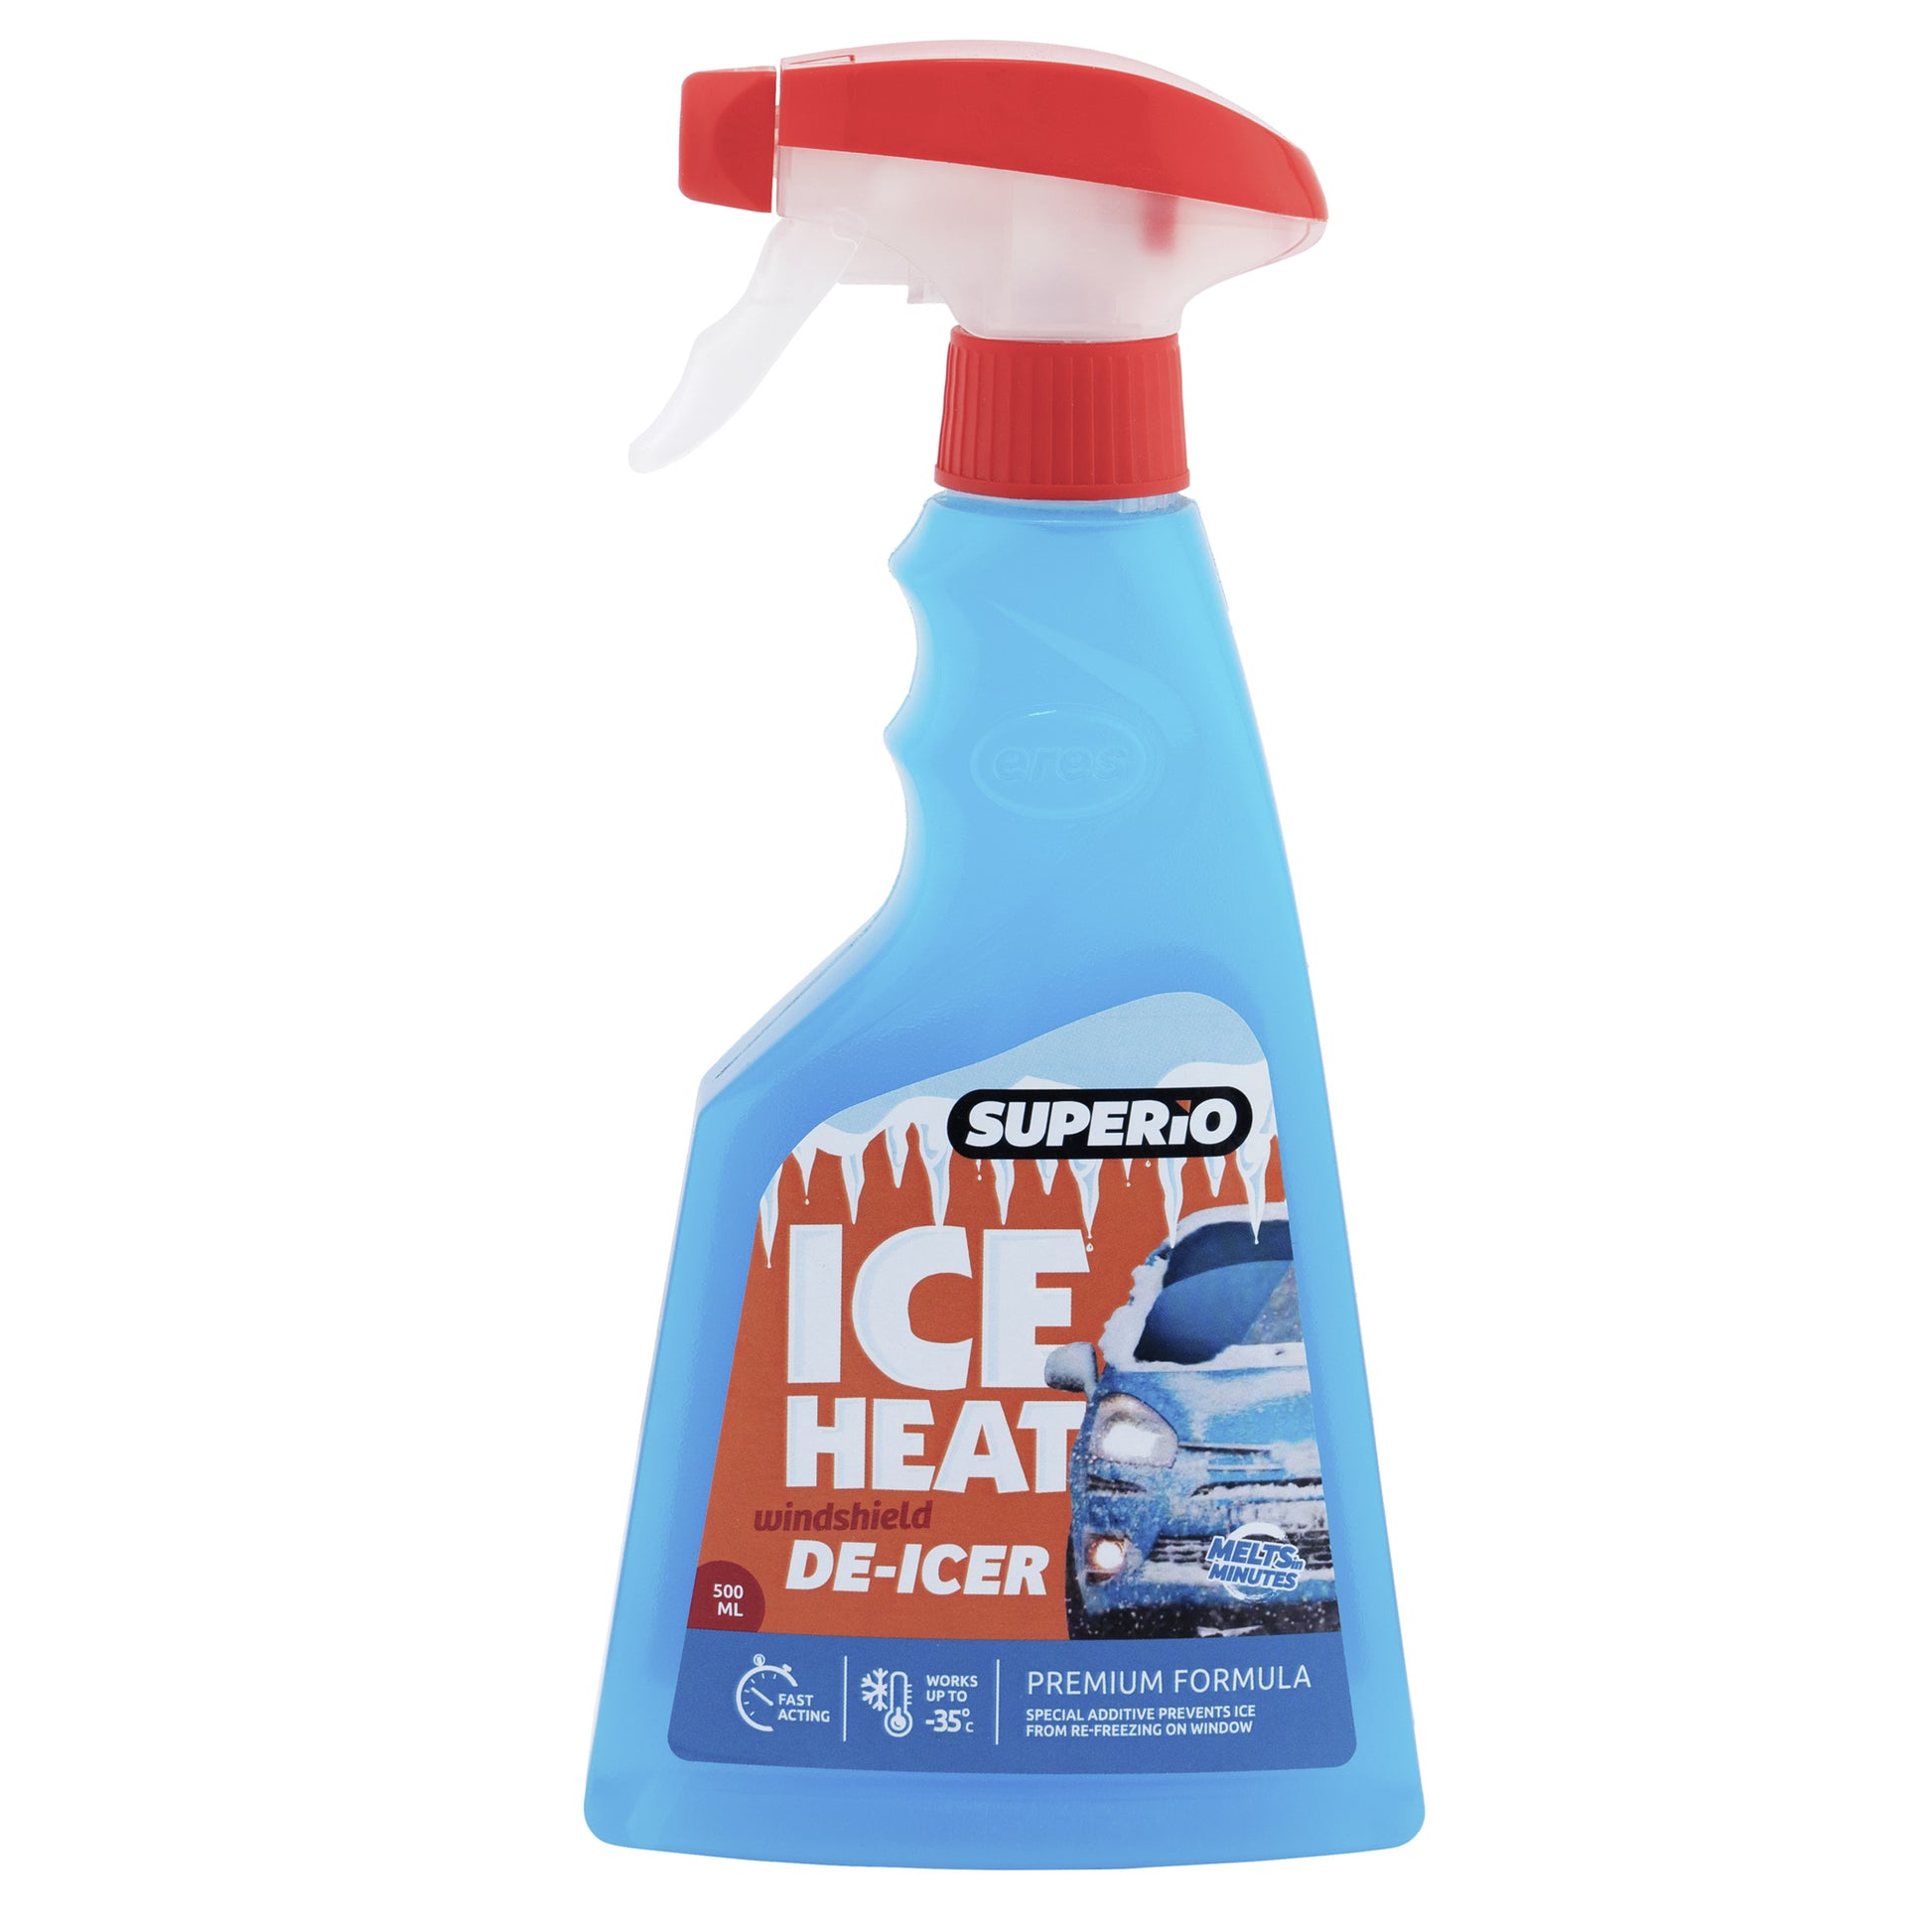 Deicer Spray For Car Windshield,de-icer For Car Windshield, Fast Ice  Melting Spray For Removing Snow, Ice And Frost